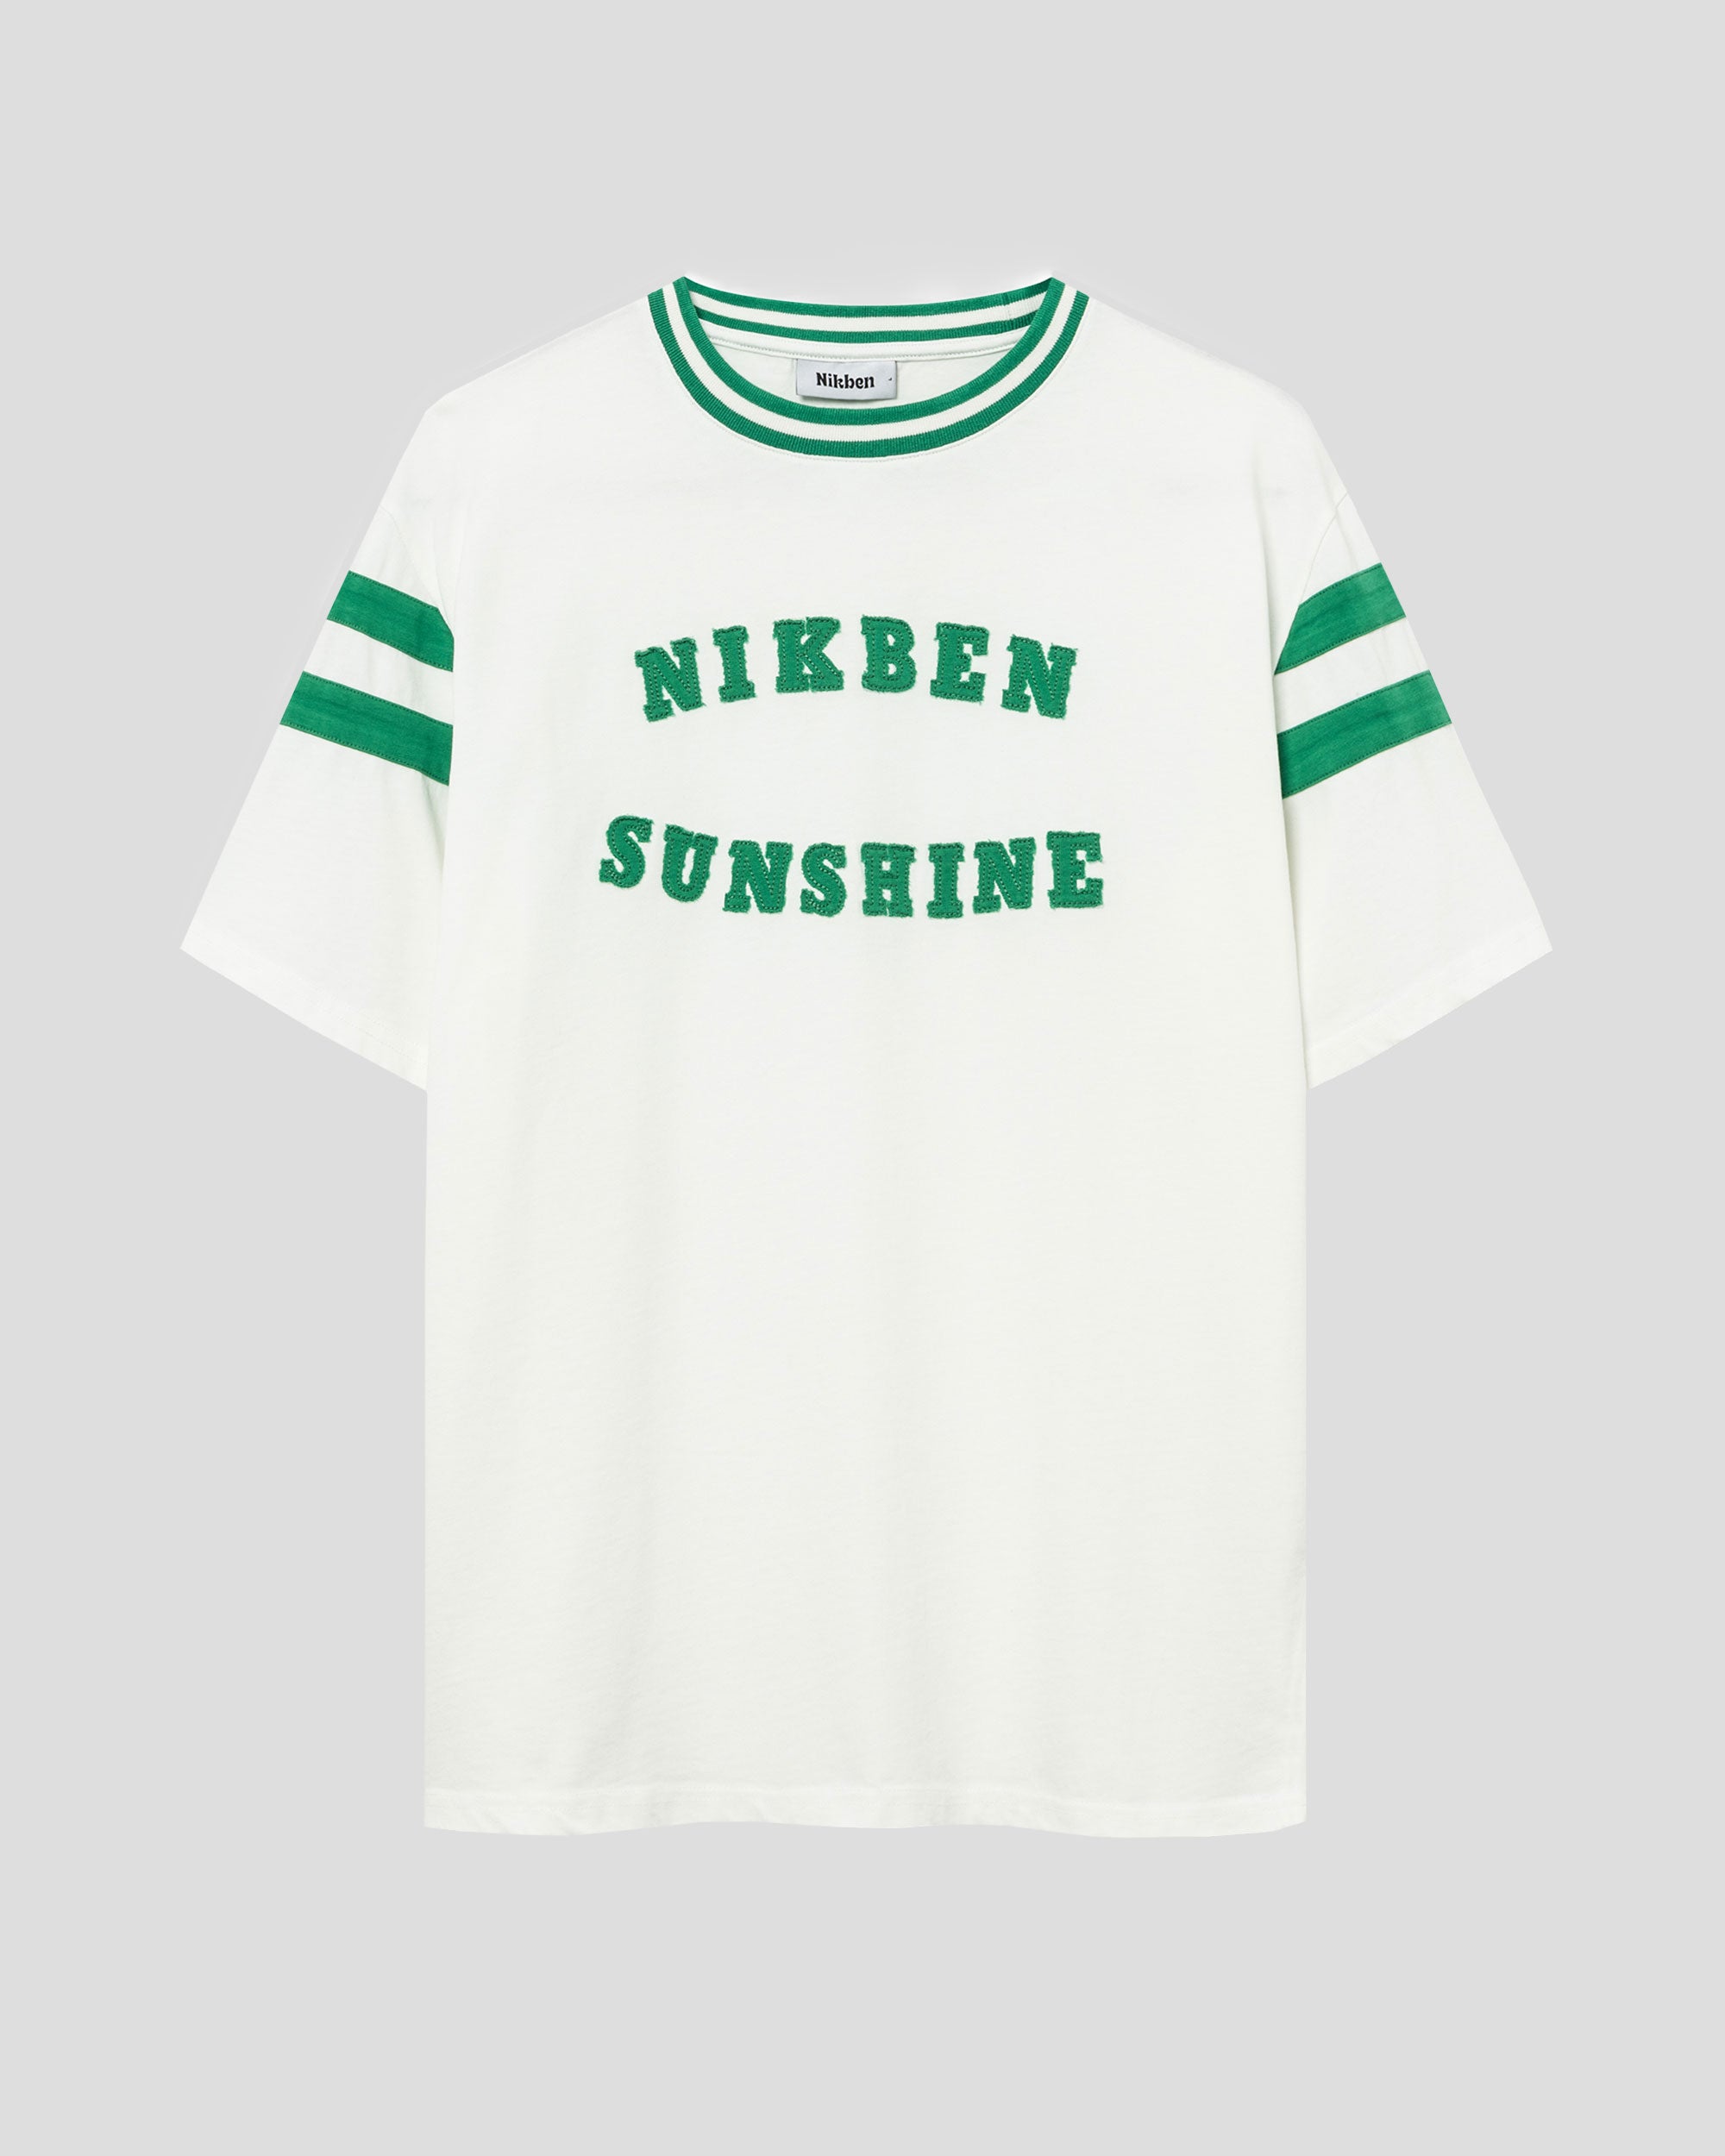 White t-shirt with green "Sunshine" print on the chest.